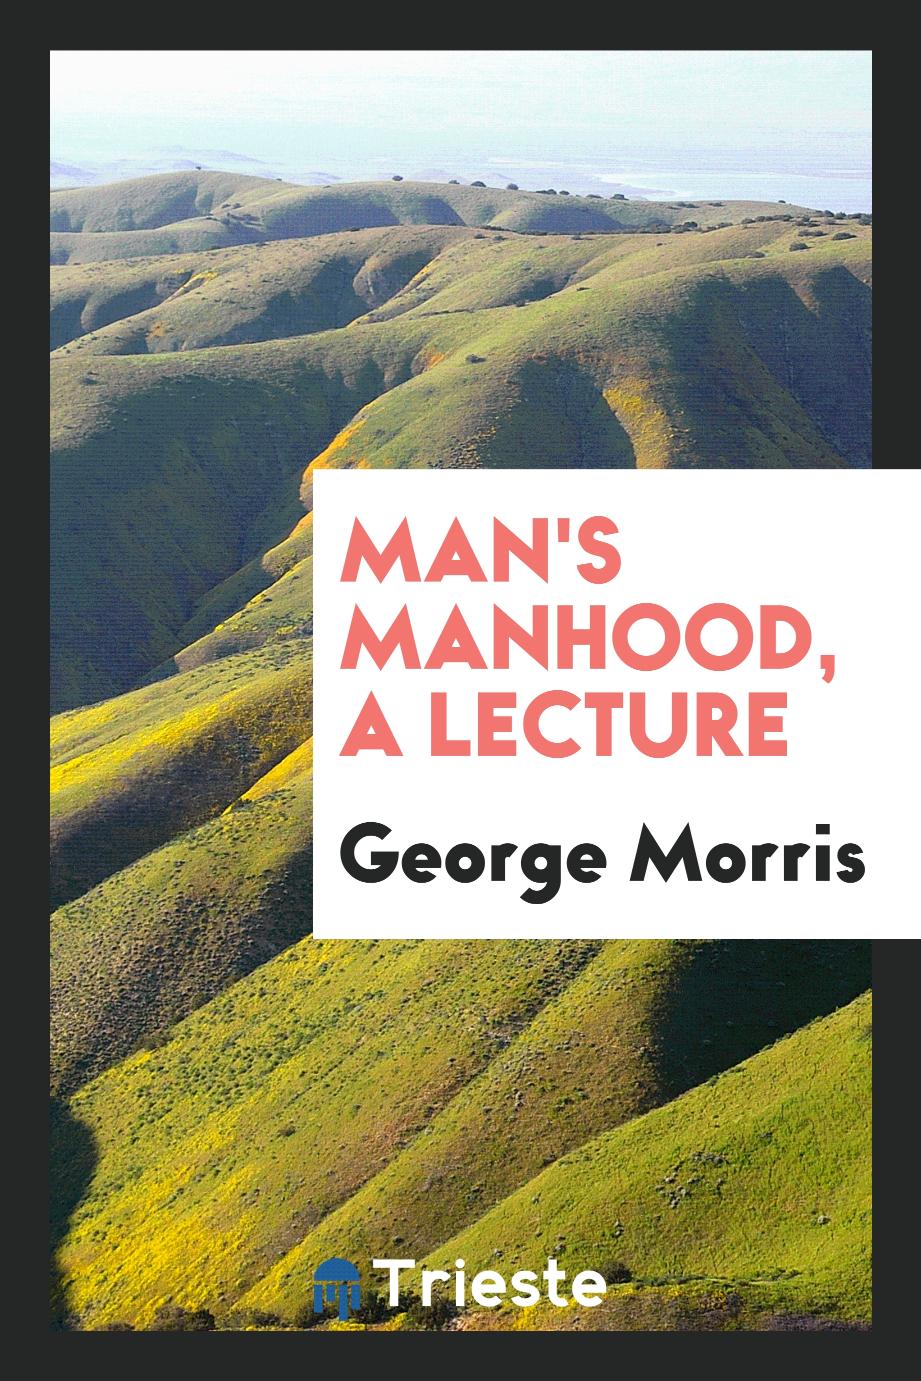 Man's manhood, a lecture